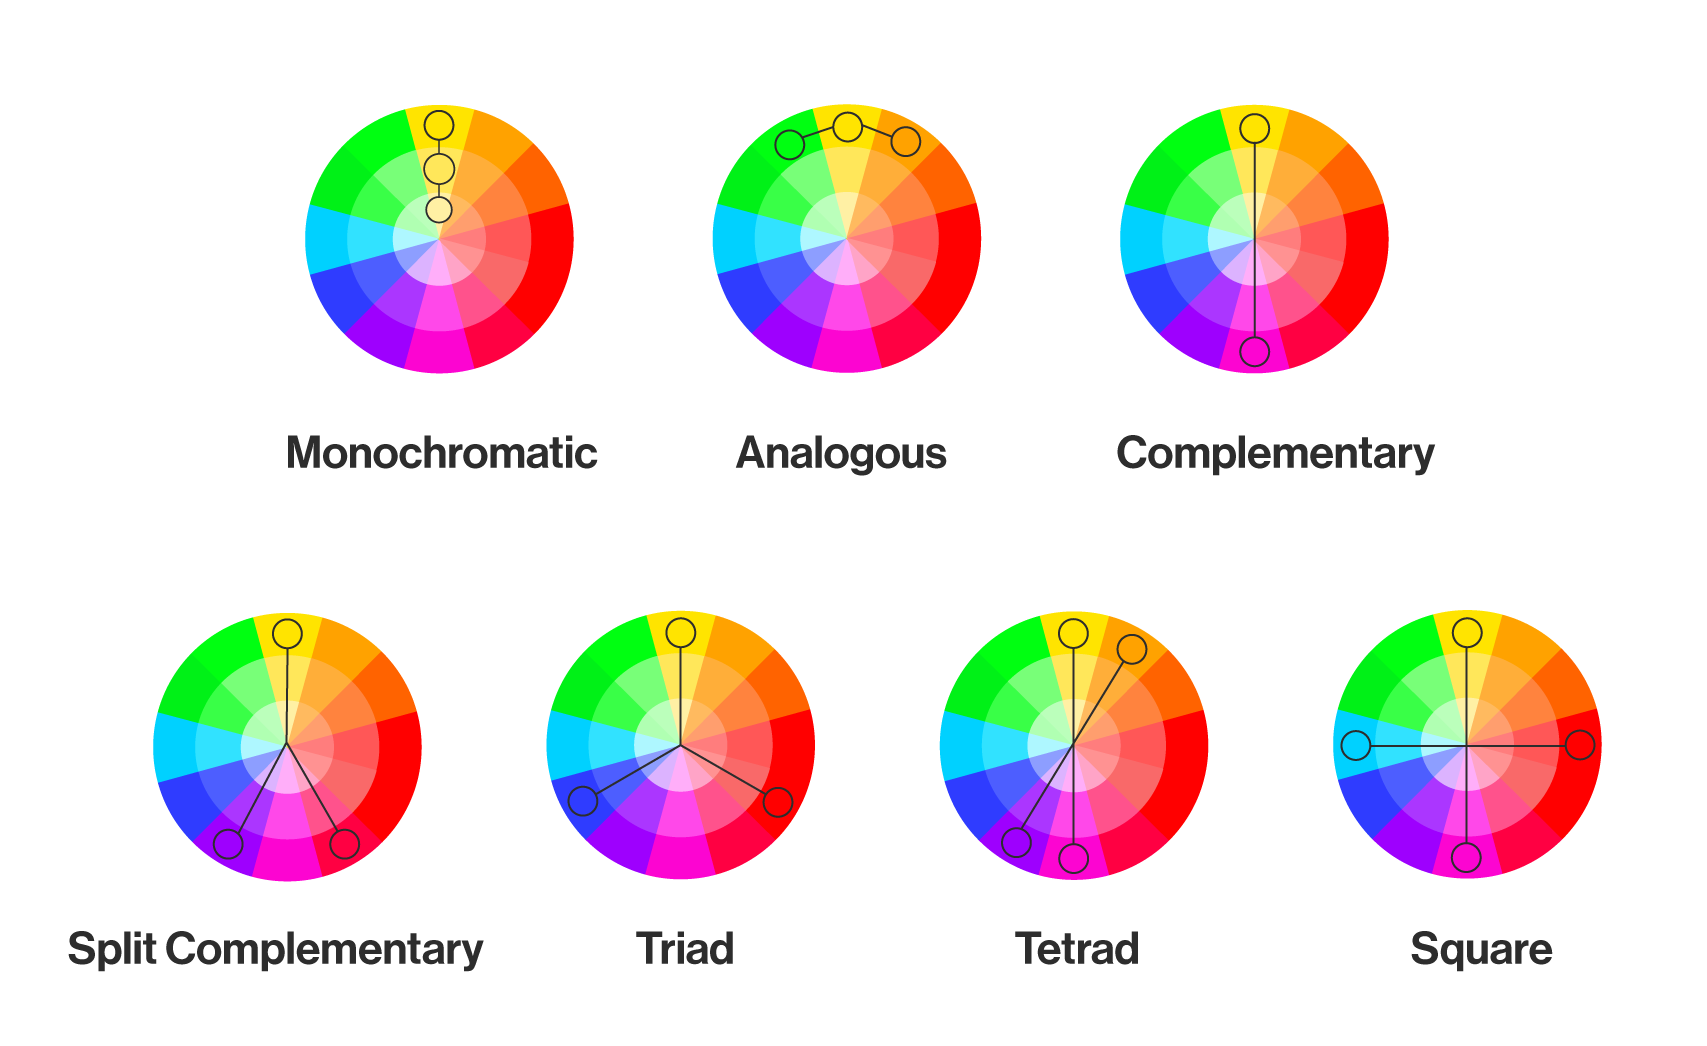 Color Wheel Poster, Color Theory for Graphic Designers and Web